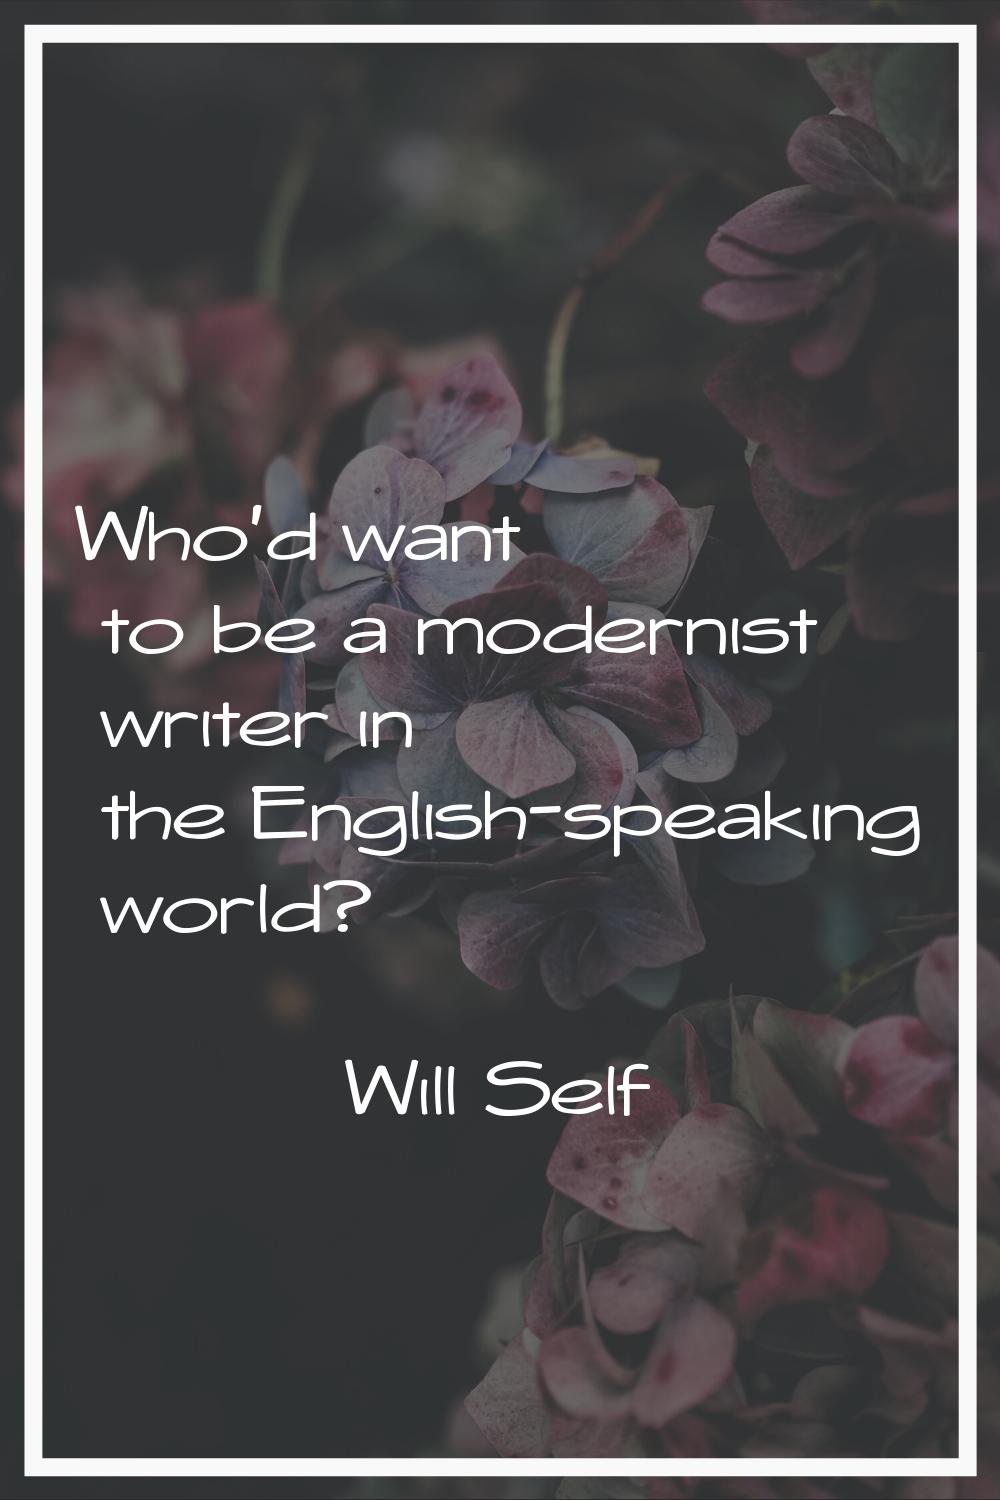 Who'd want to be a modernist writer in the English-speaking world?